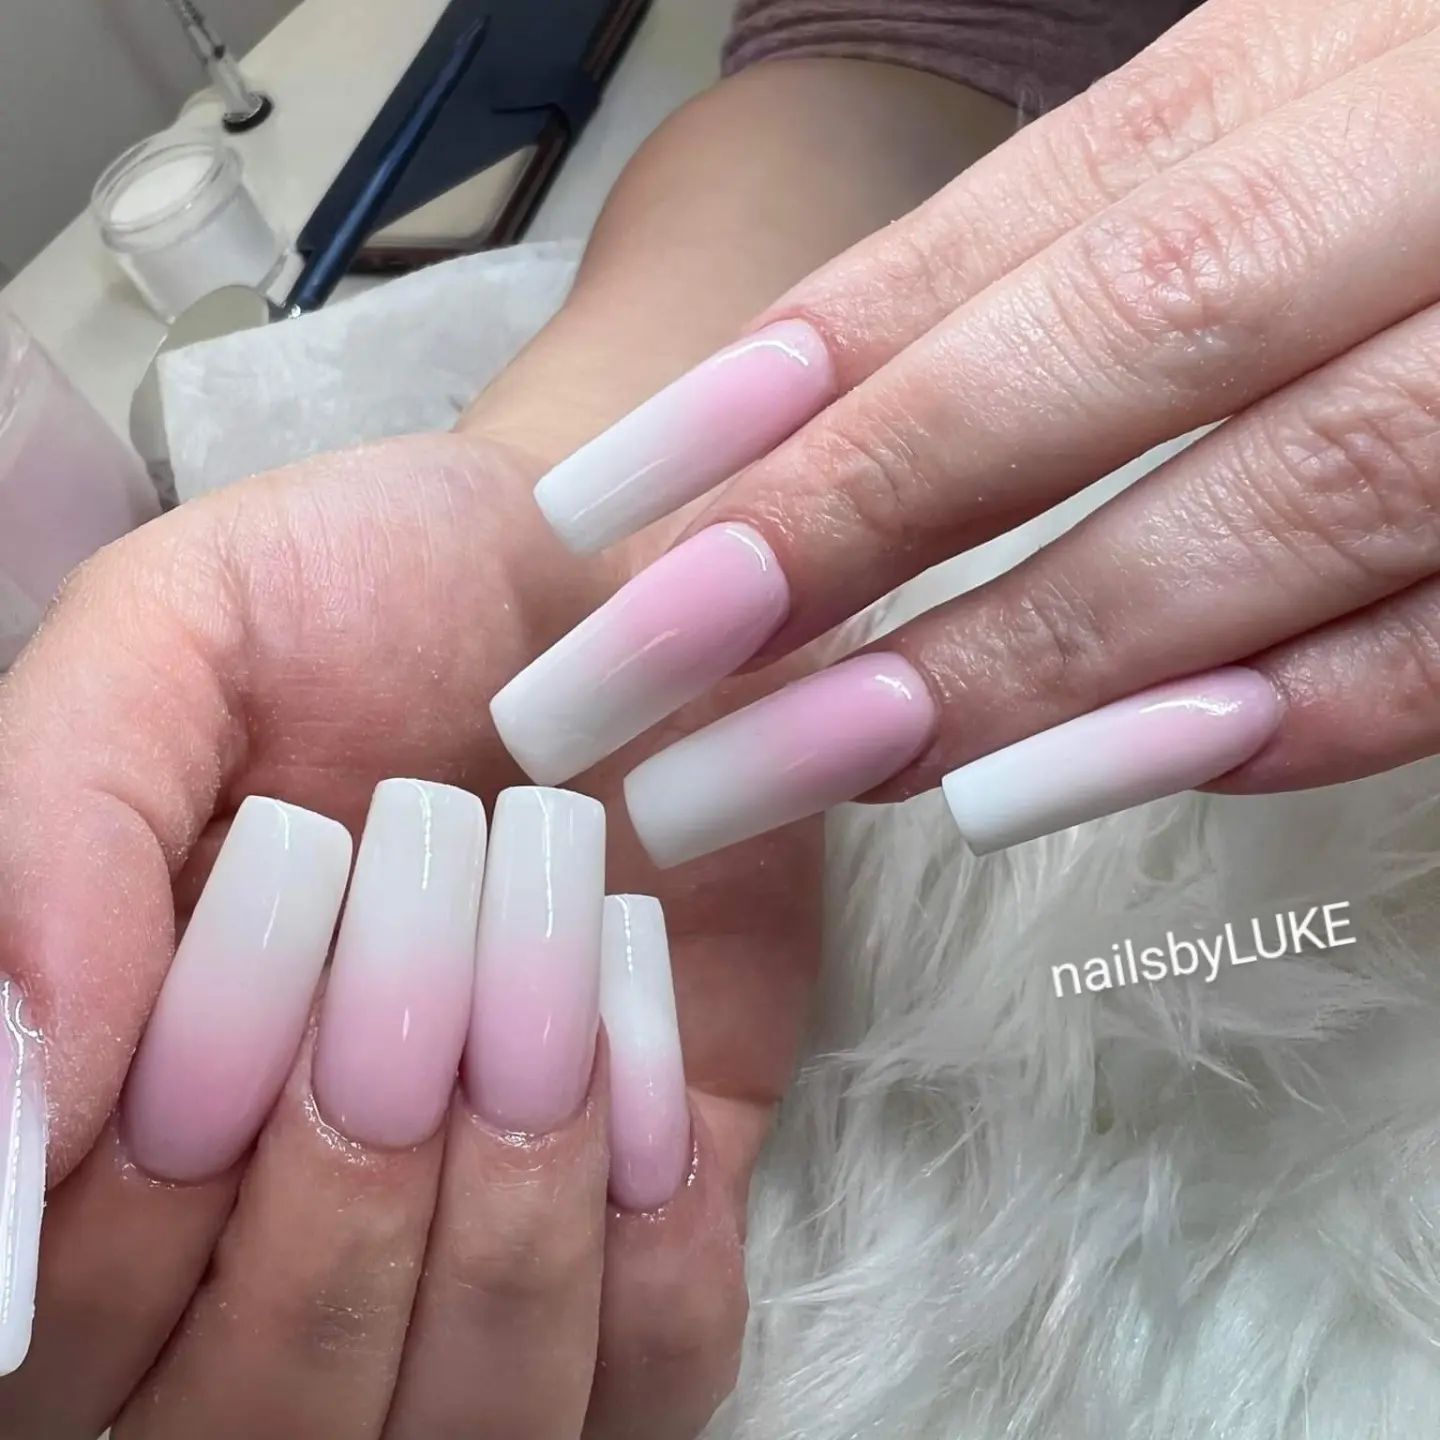 If you do not care about your comfort a lot and you can do everything to look stunning, why don't you give a shot to these white and pink ombre nails? You are sure to rock with them.